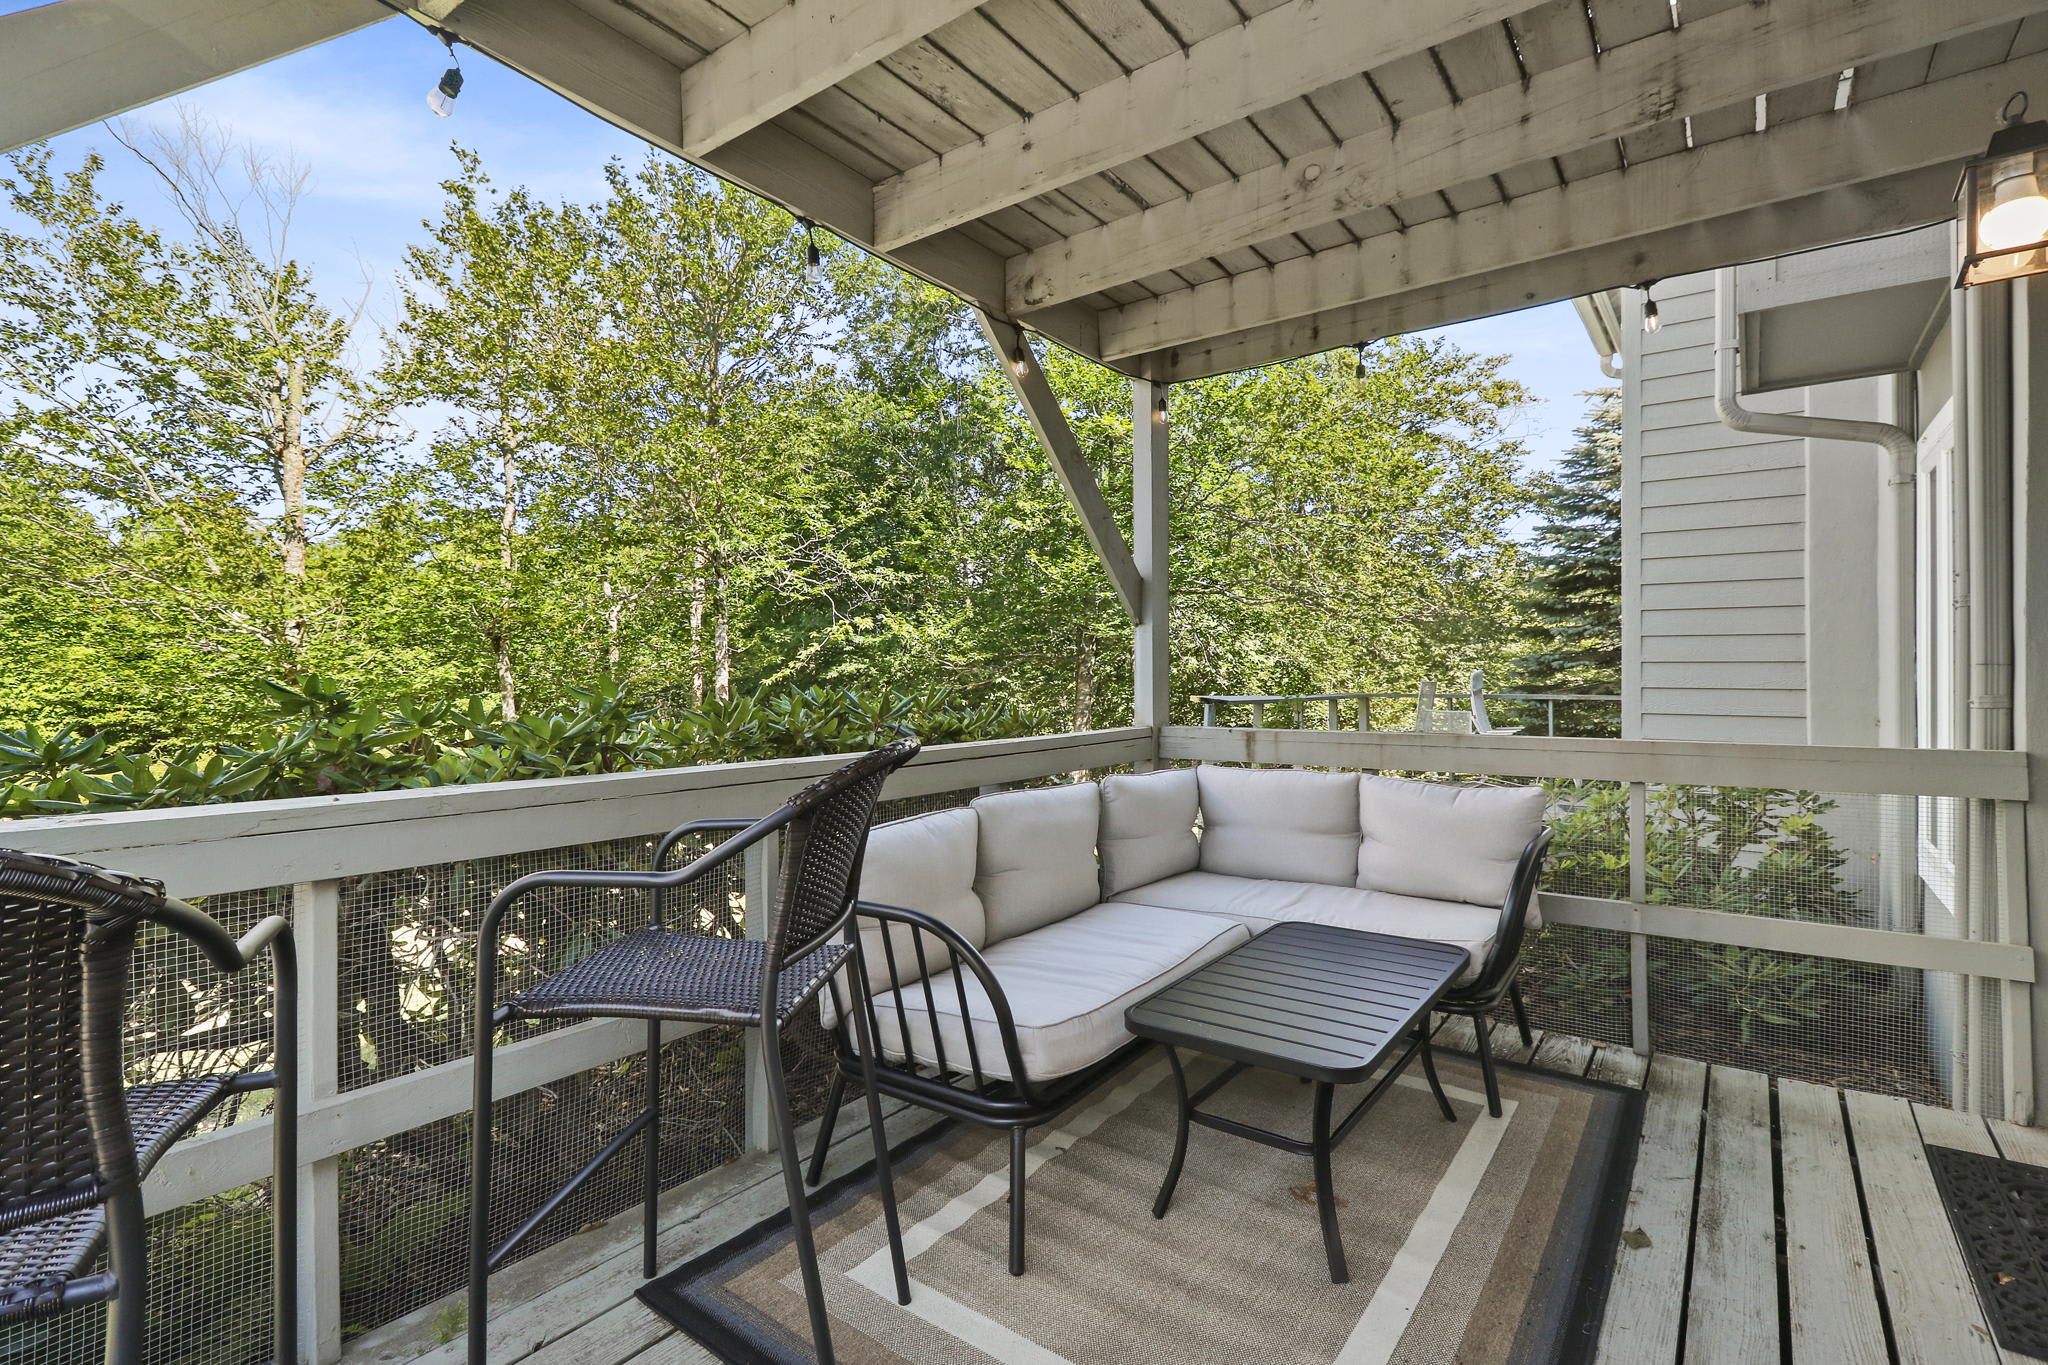 Our outdoor deck exudes sophistication, creating a relaxing ambiance.